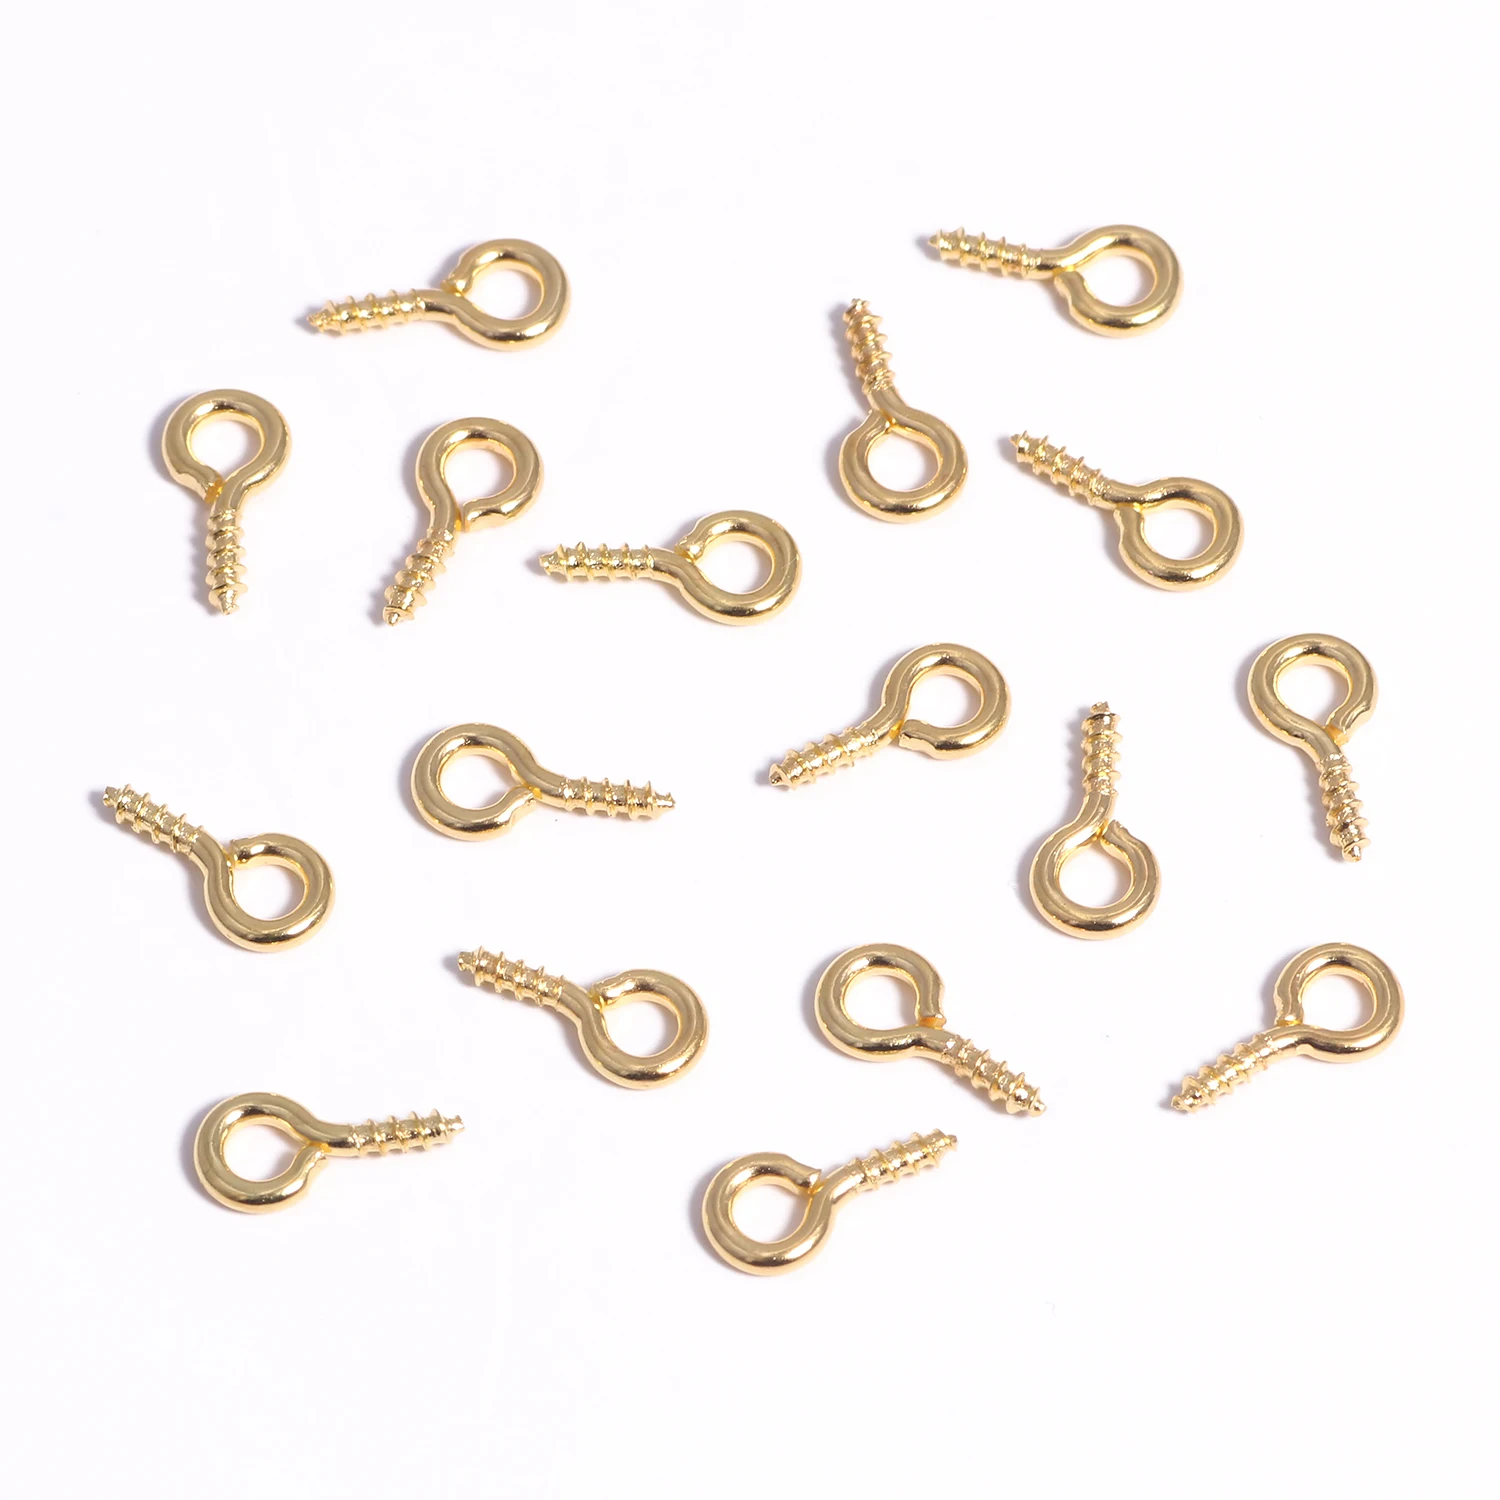 200pc Small Tiny Mini Eye Pins Eyepins Hooks Eyelets Screw Threaded Gold Silver Clasps Hooks Jewelry Findings For Making DIY 8x4 images - 6